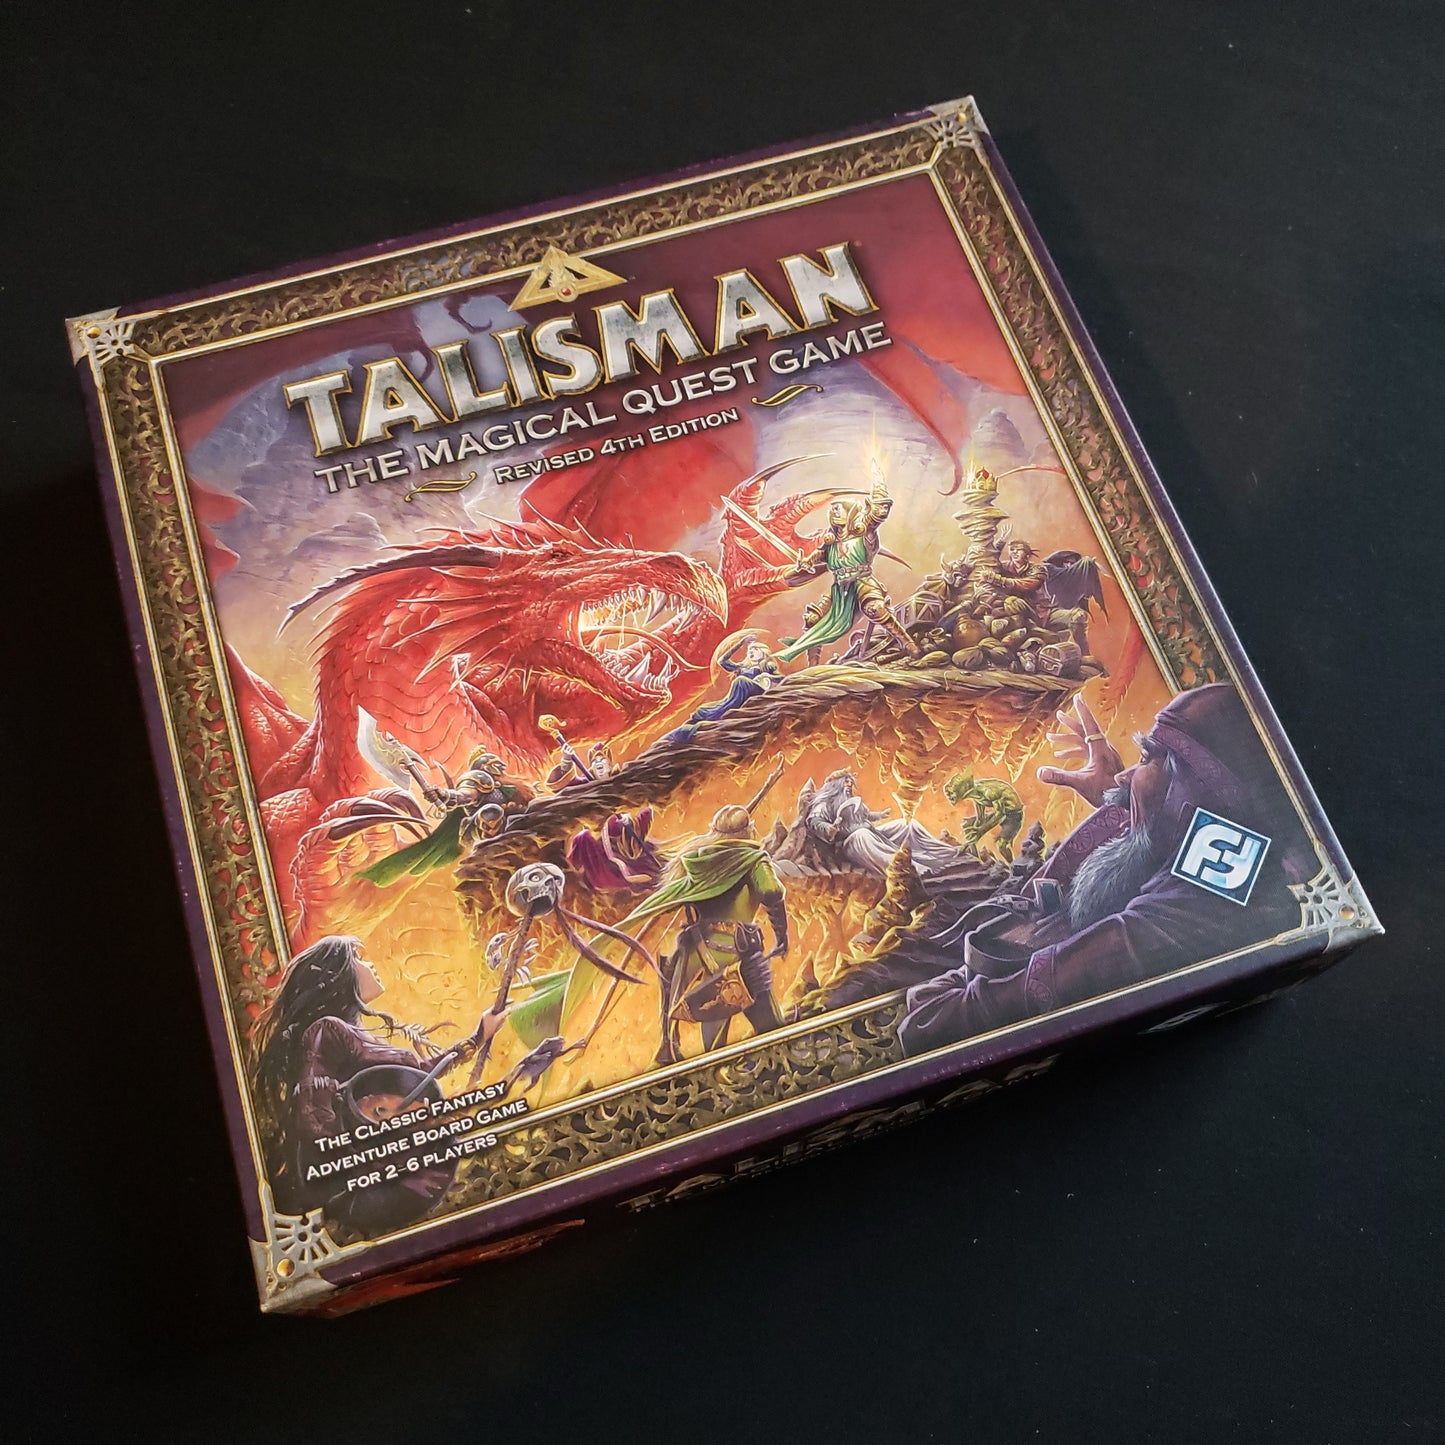 Talisman: The Magical Quest Game (Revised 4th Edition)